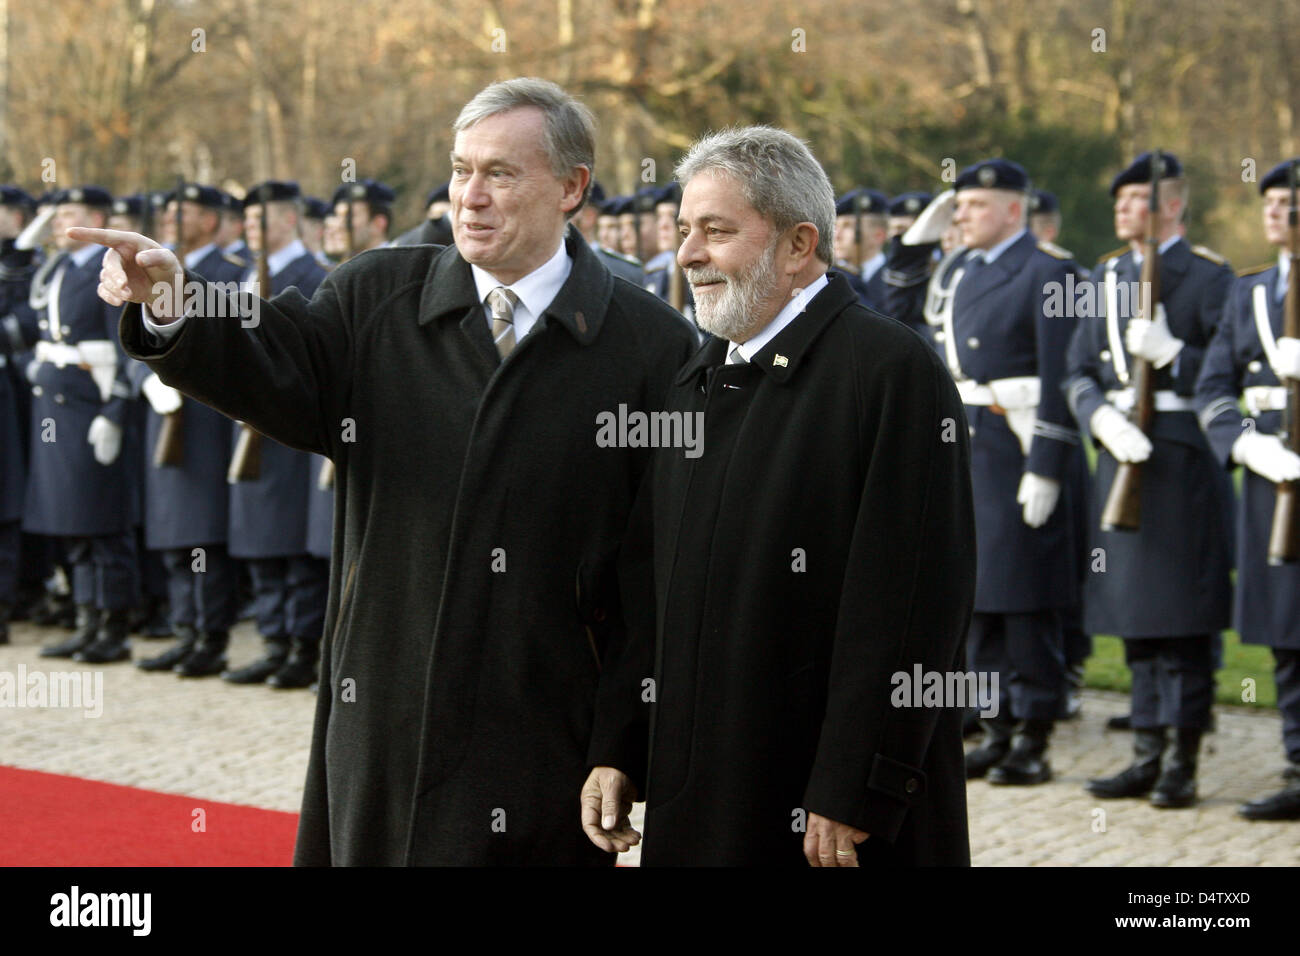 German President Horst Koehler (L) receives the president of Brazil Luiz Inácio Lula da Silva in front of 'Schloss Bellevue' ('Bellevue Palace') in Berlin, Germany, 03 December 2009. The guest from Brazil will spend several days in Germany. Photo: WOLFGANG KUMM Stock Photo